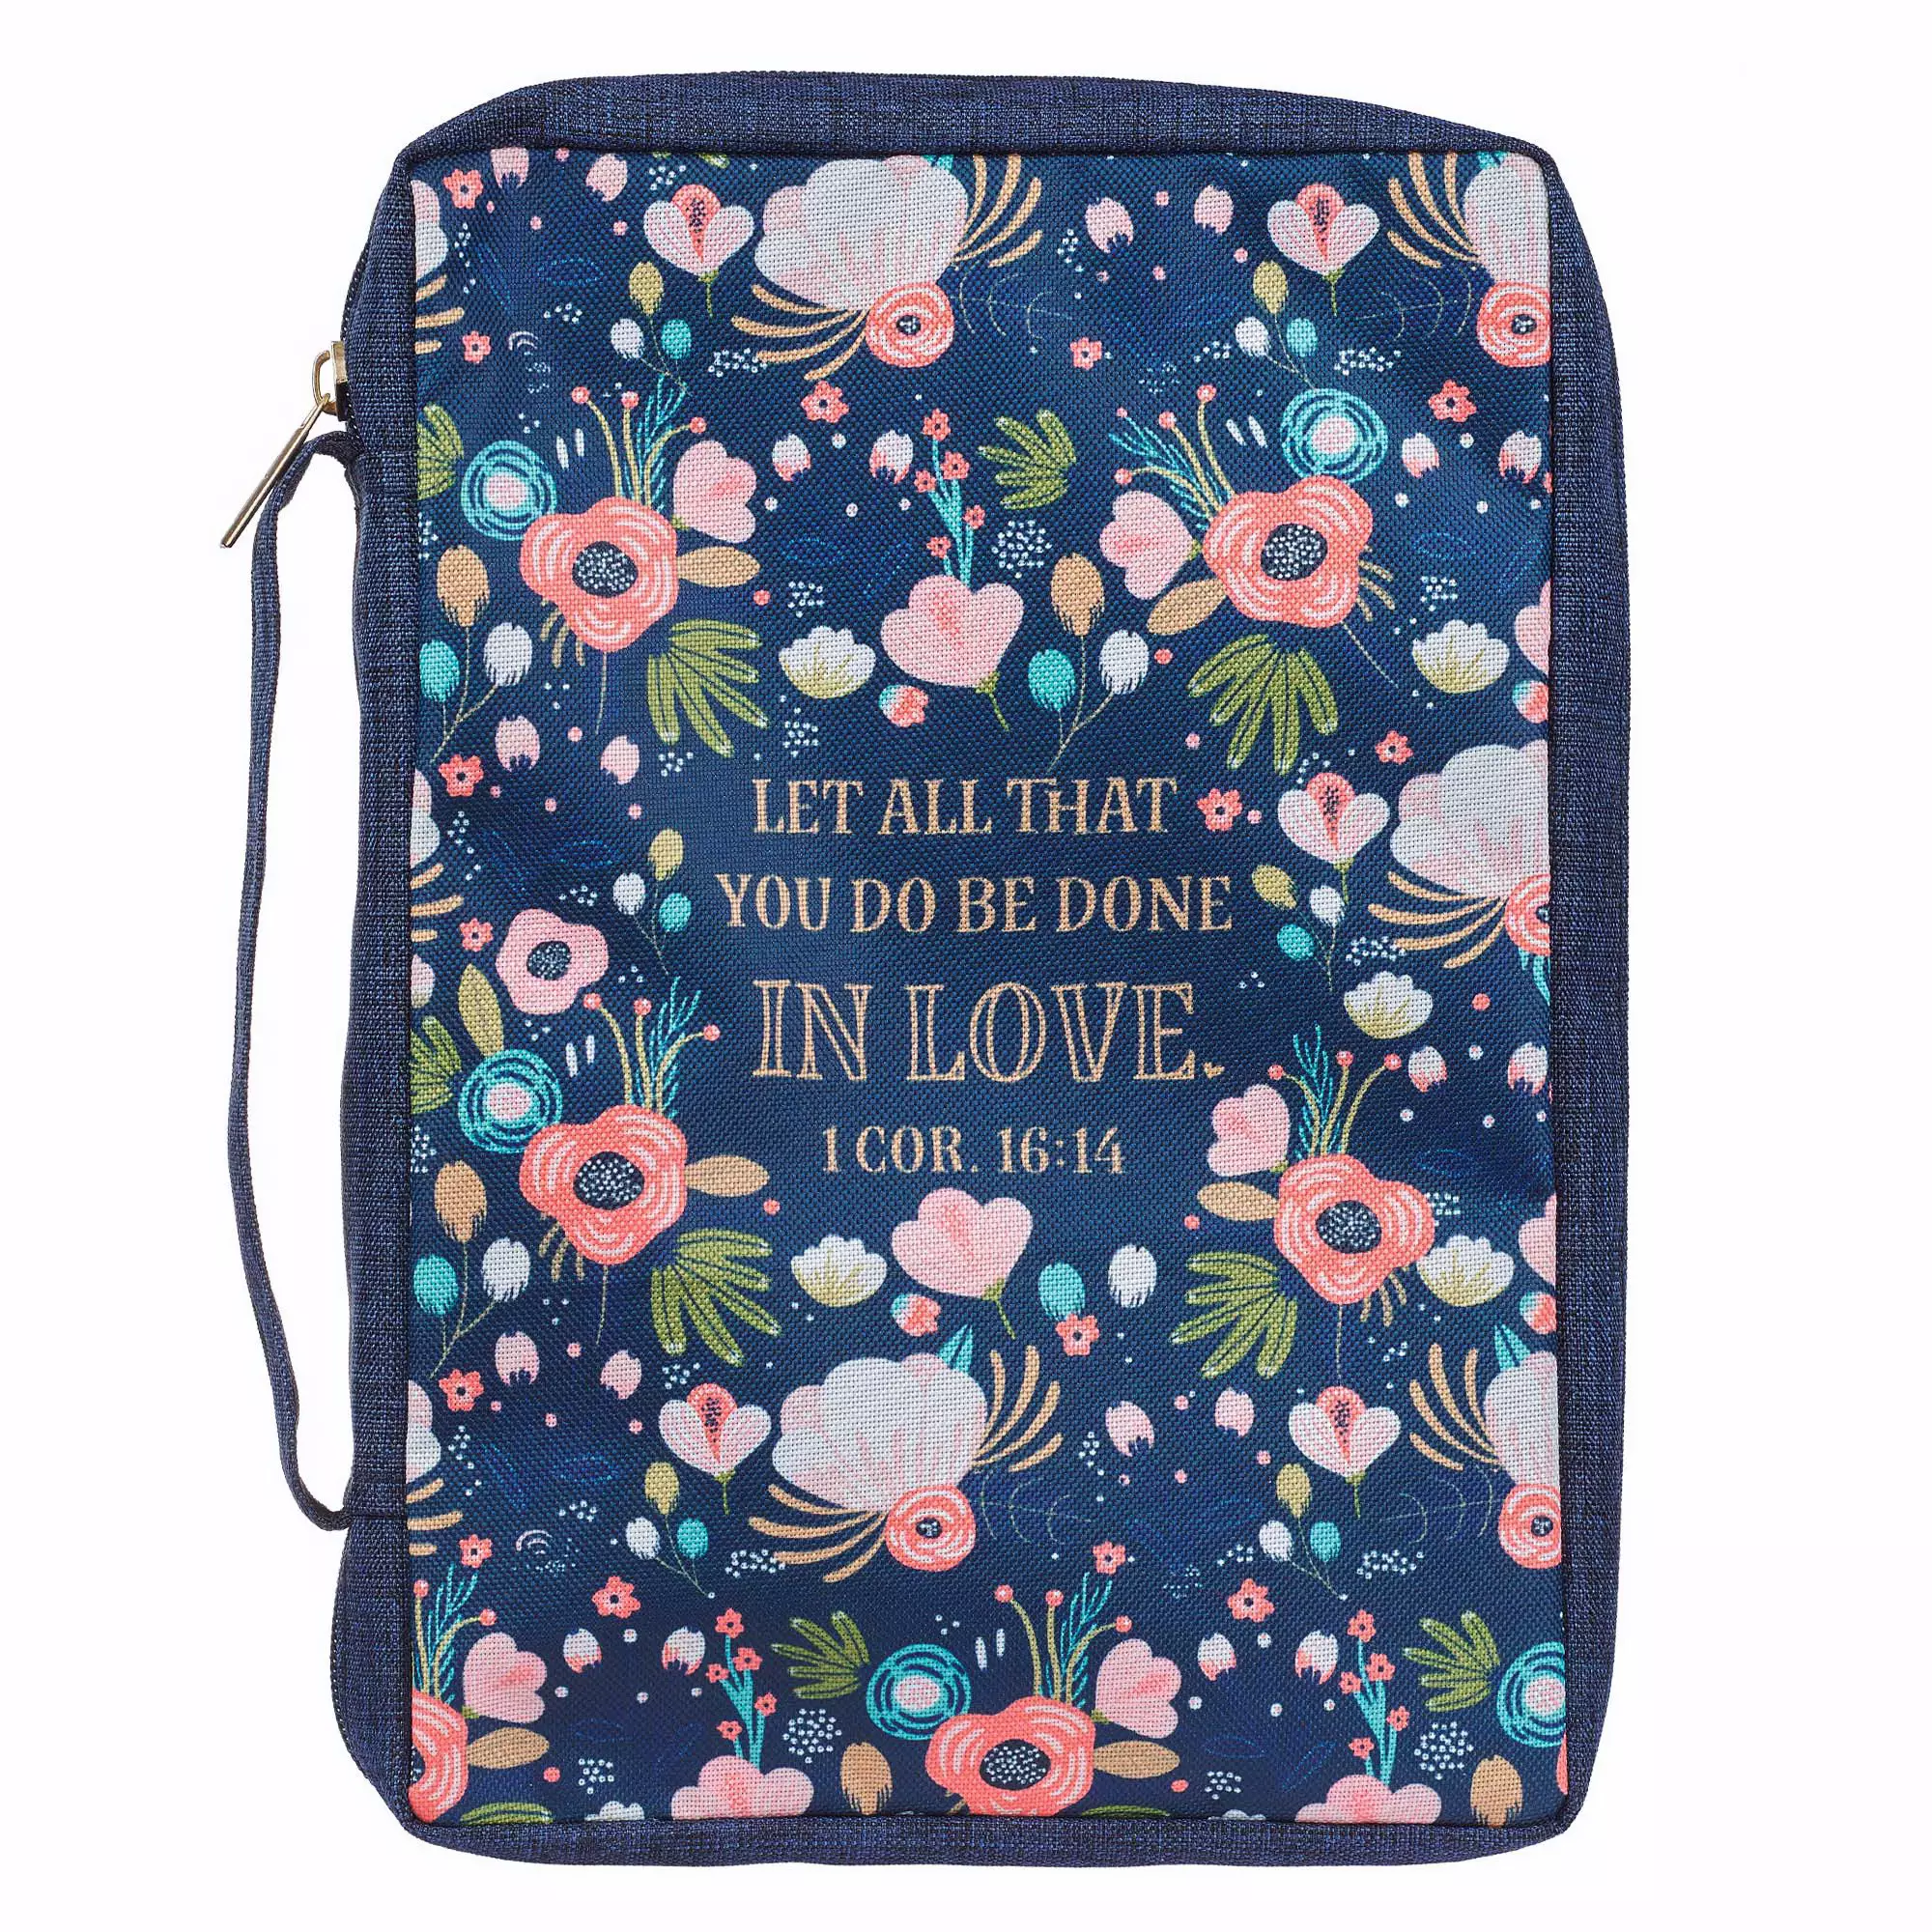 Done in Love Navy Floral Value Large Bible Case - 1 Corinthians 16:14